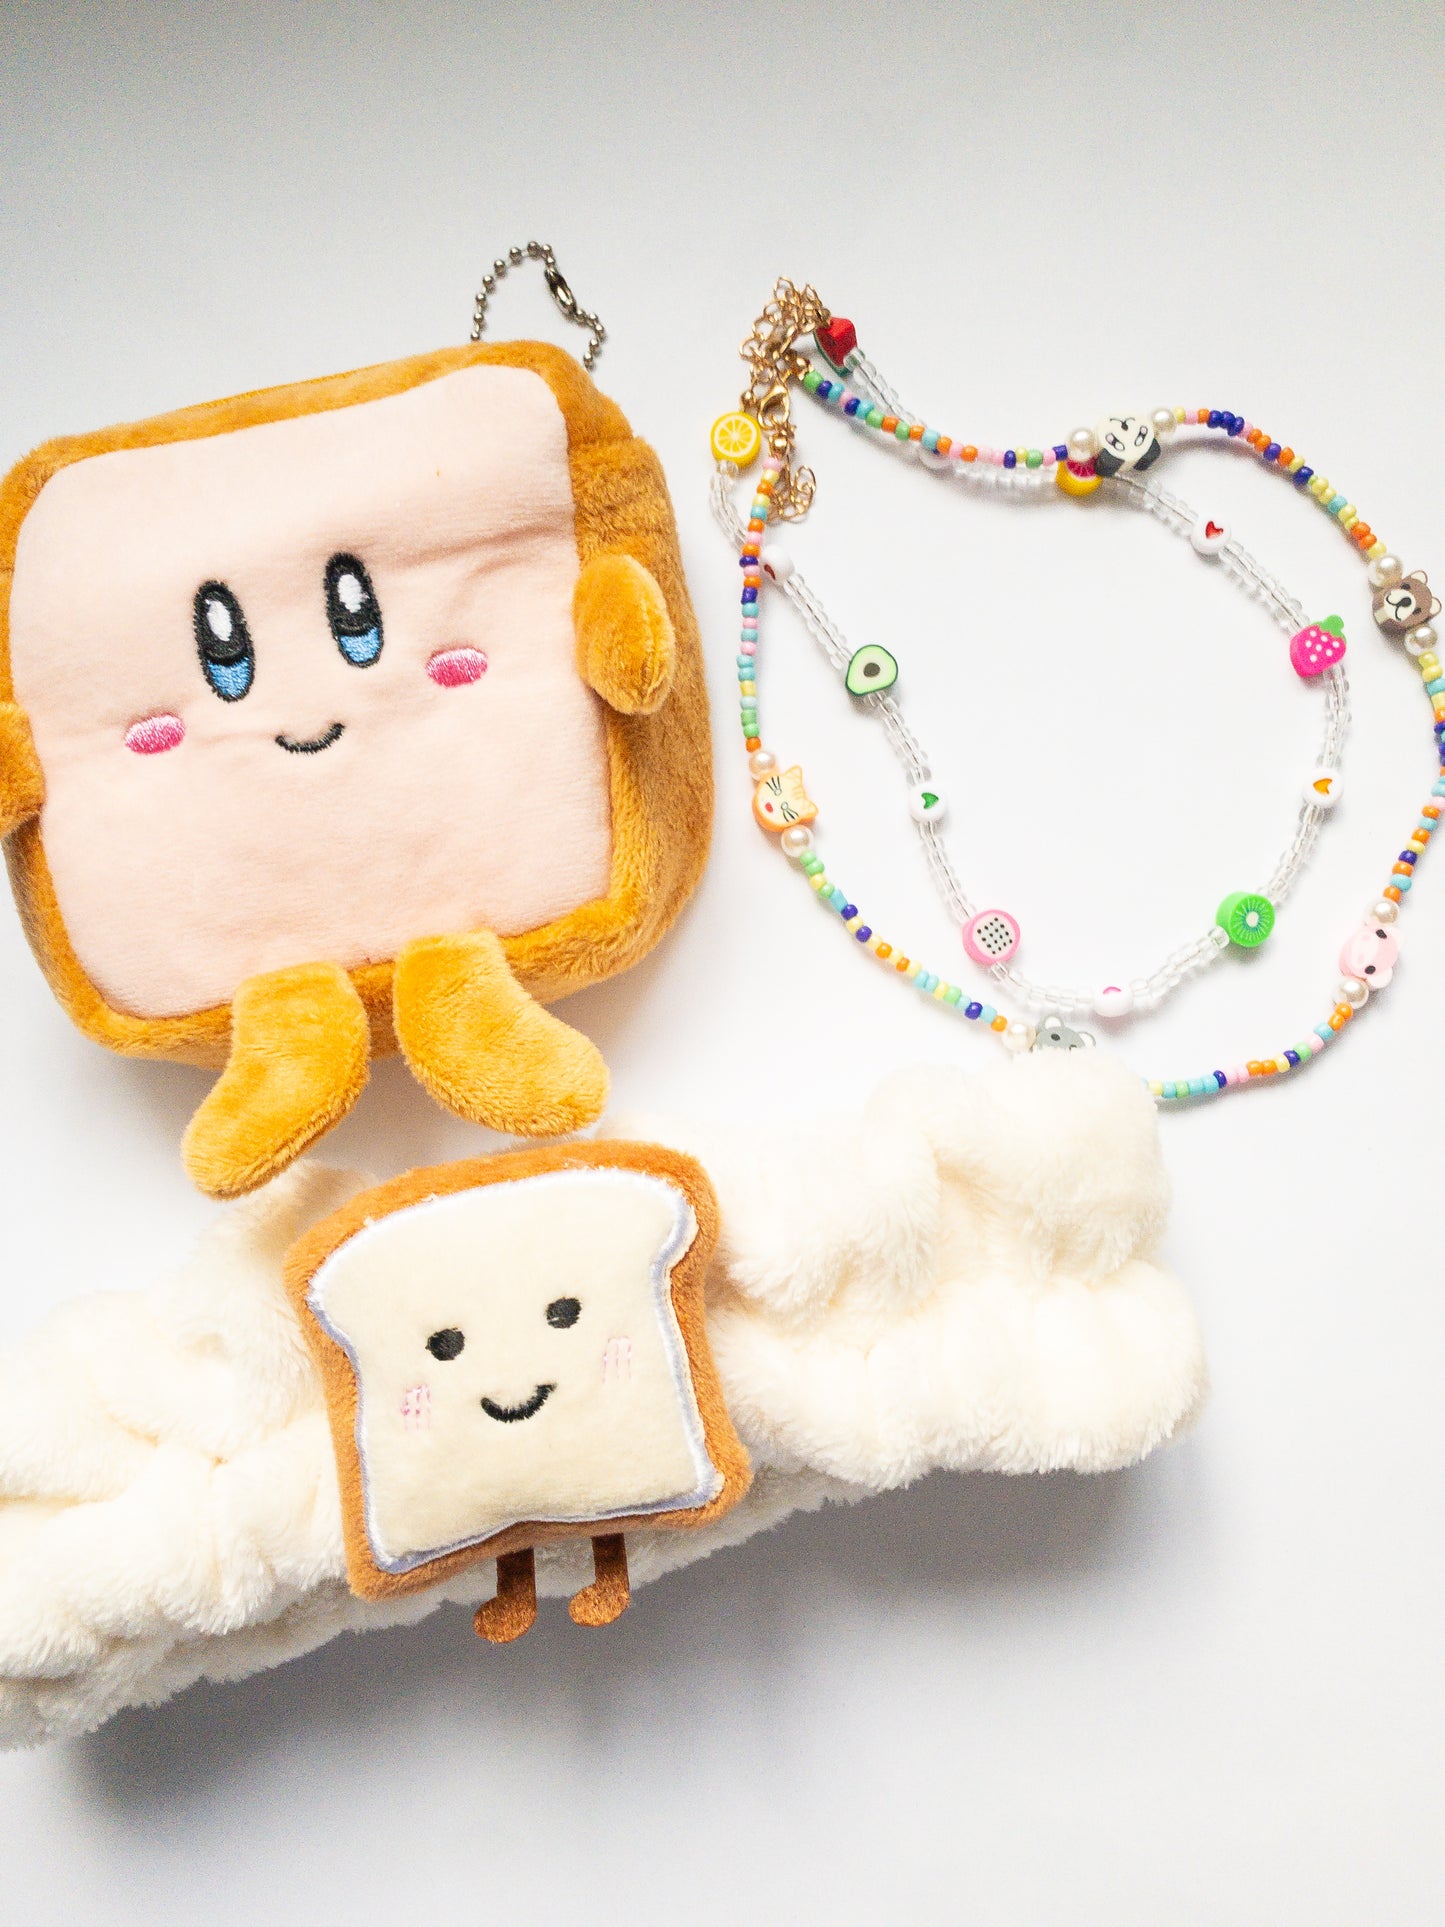 A collection of your favorite dessert--the Brick Toast! This bundle includes the Brick Toast Coin Purse Keychain, the Fruity Critter Necklace Set (comes with 2 necklaces), and the Brick Toast Plush Spa Headband. Save $6 with this bundle!